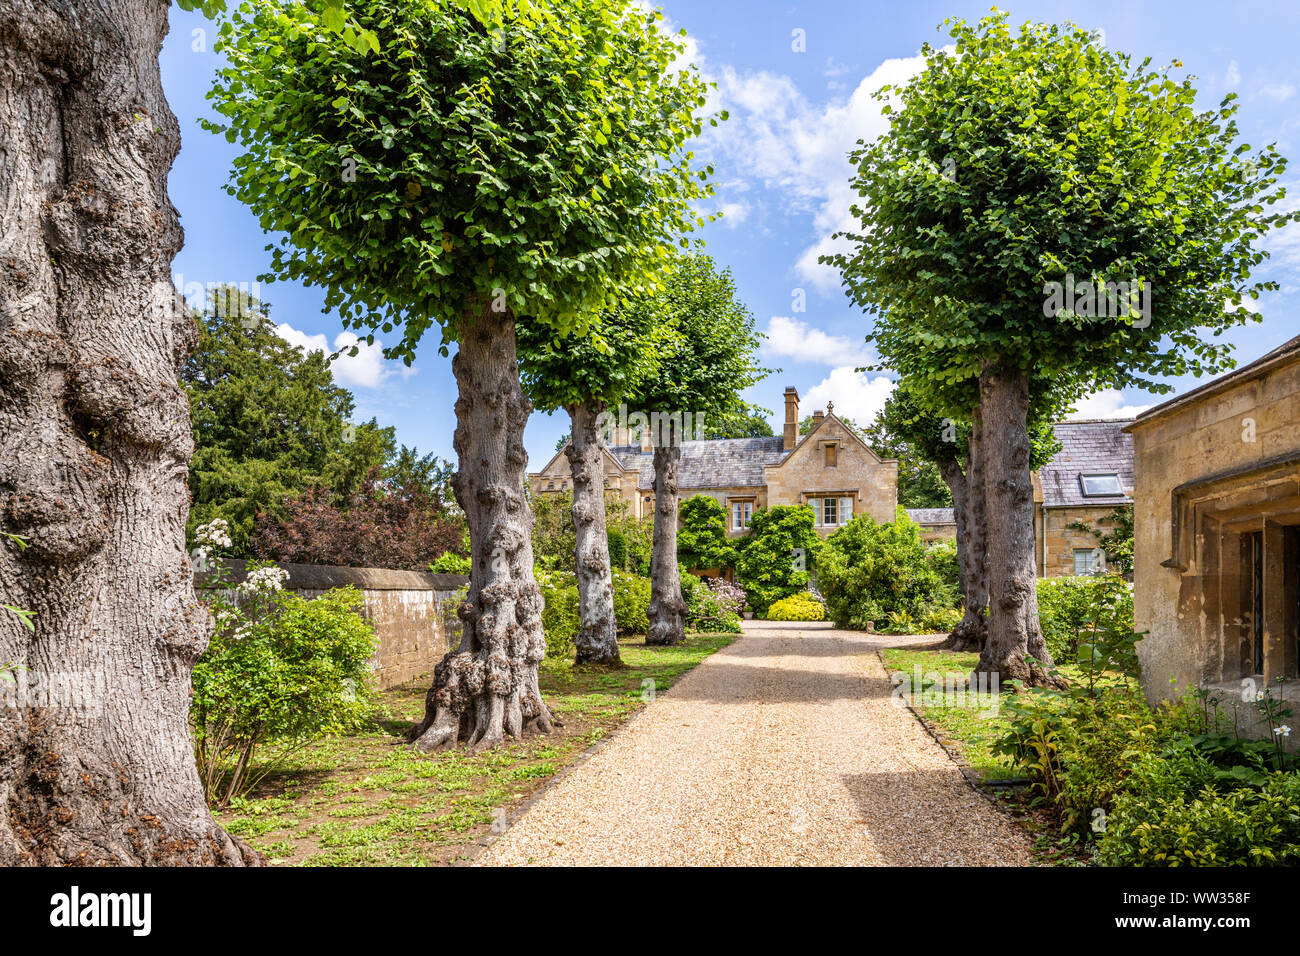 The entrance drive to Stanton Court in the Cotswold village of Stanton, Gloucestershire UK Stock Photo